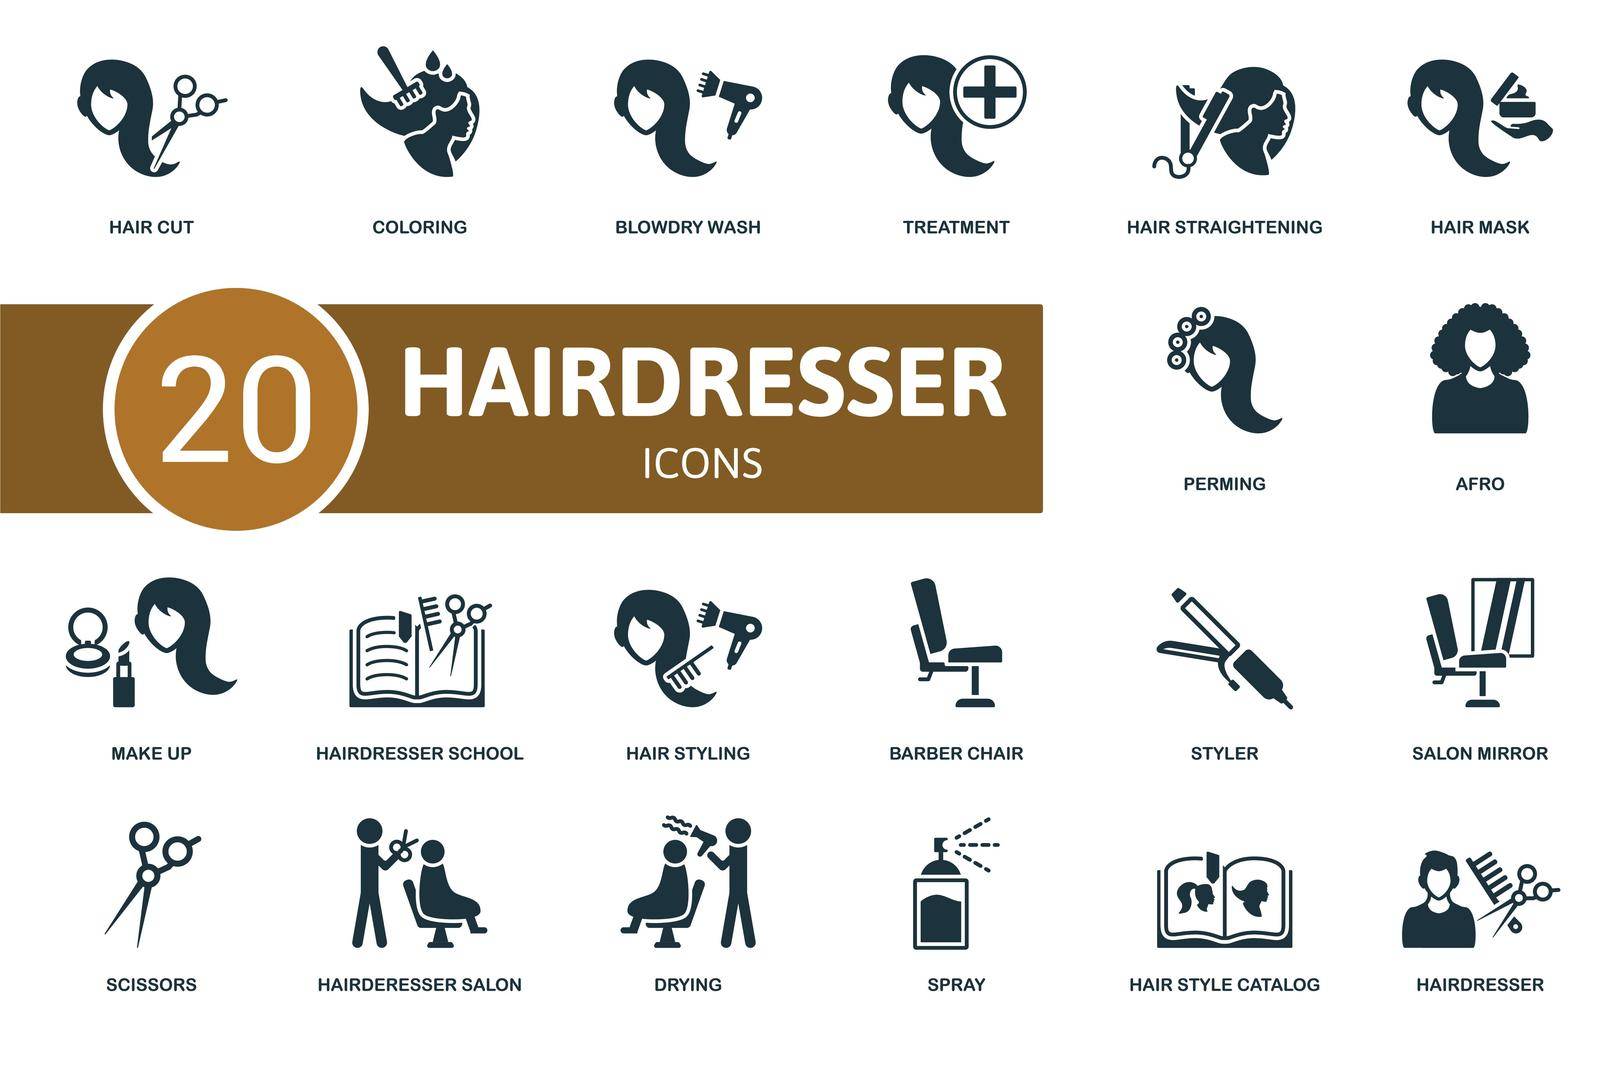 Hairdresser set icon. Contains hairdresser illustrations such as coloring, treatment, hair mask and more